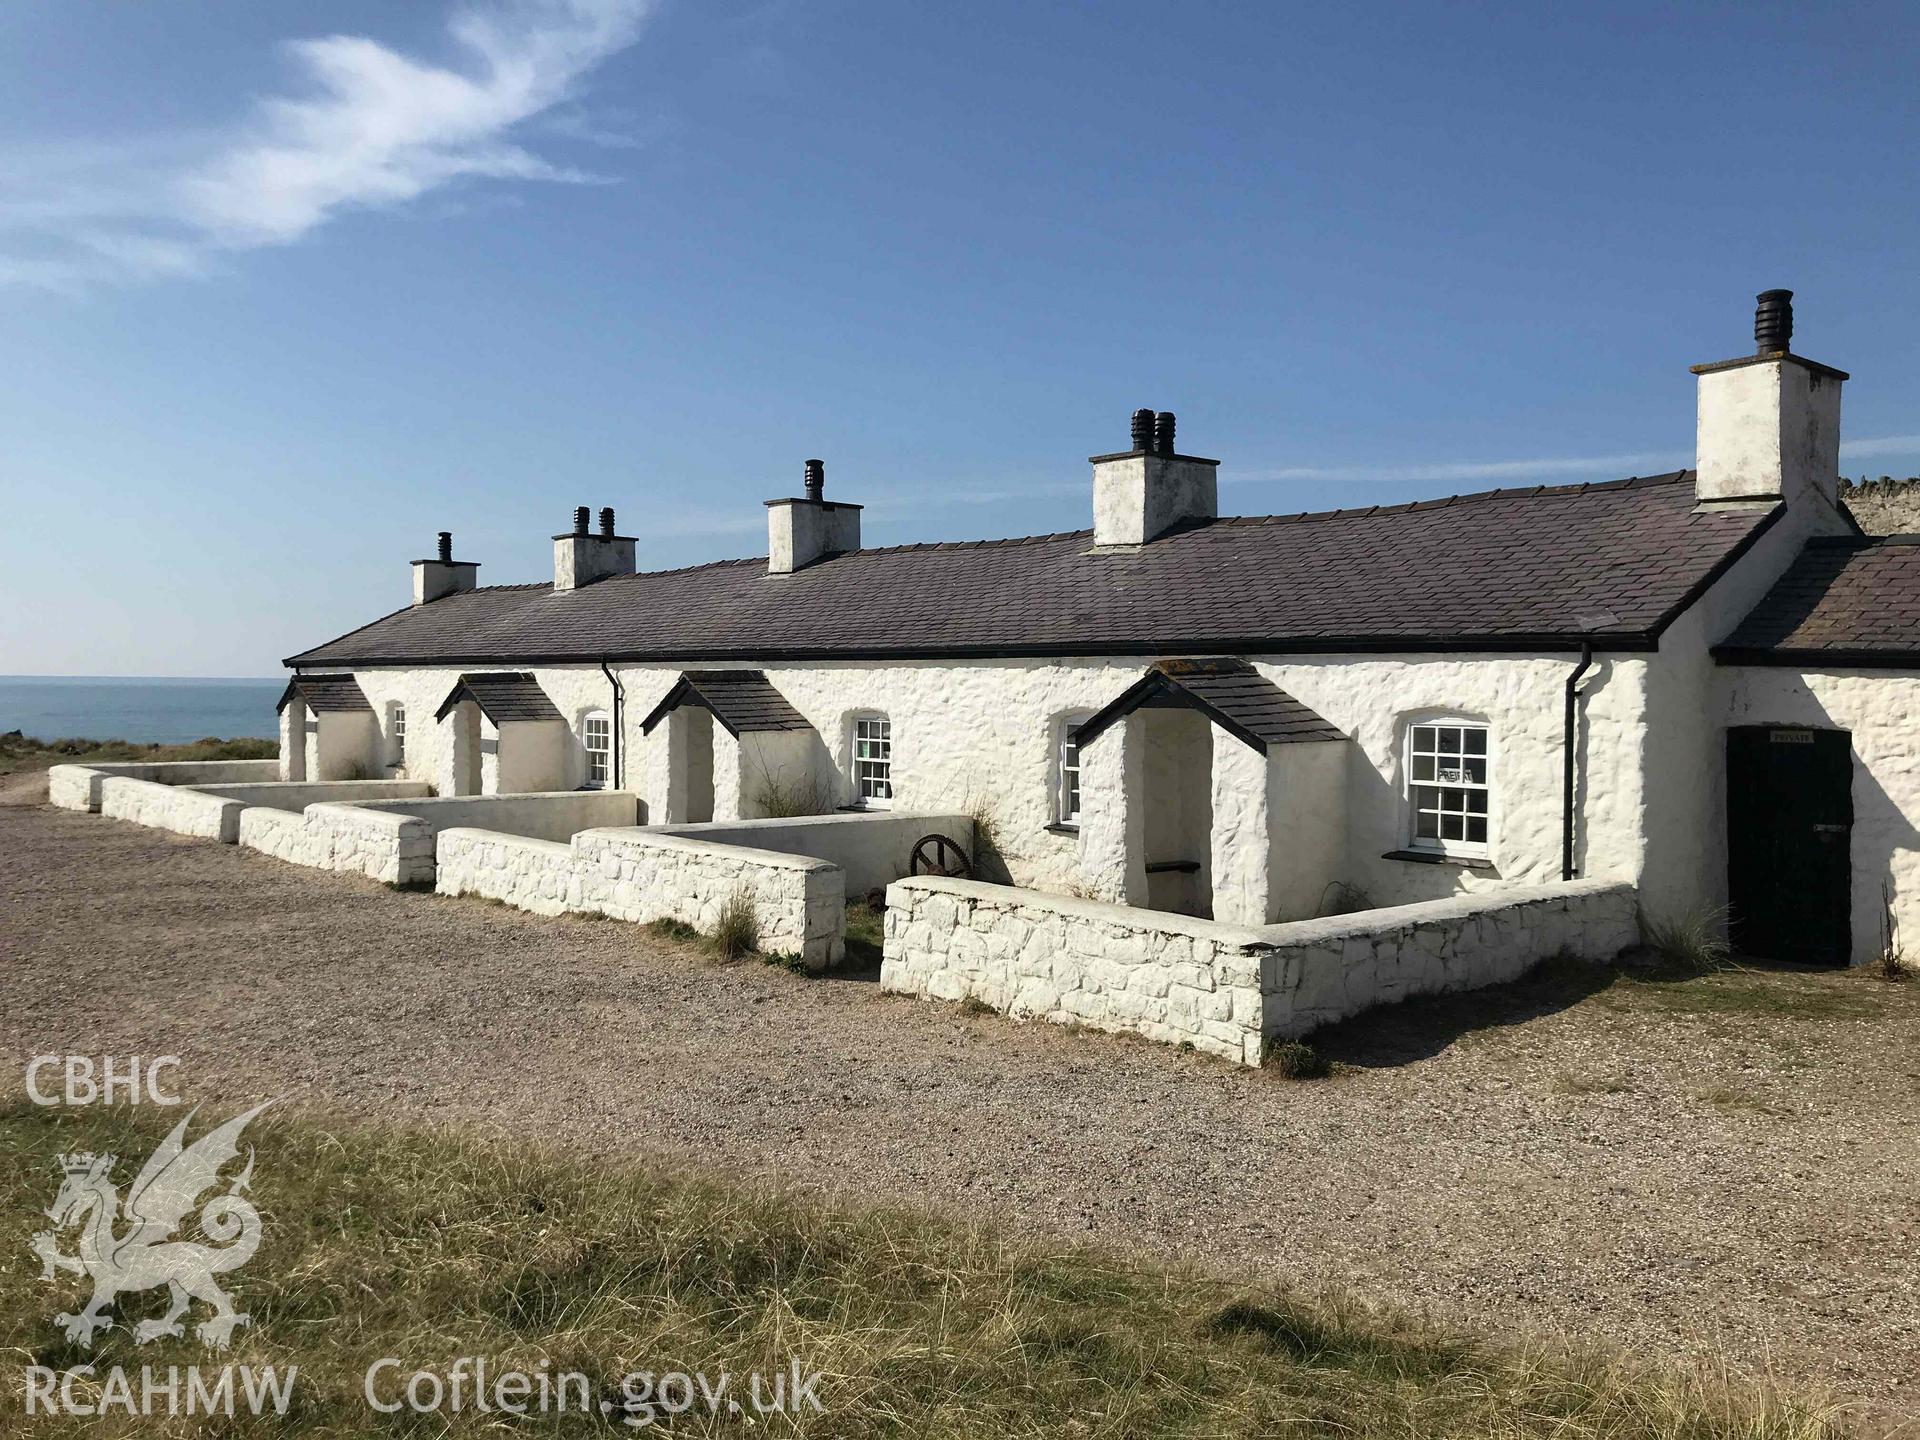 Digital photograph showing front elevation of the Pilots House on Llanddwyn Island, produced by Paul Davis in 2020